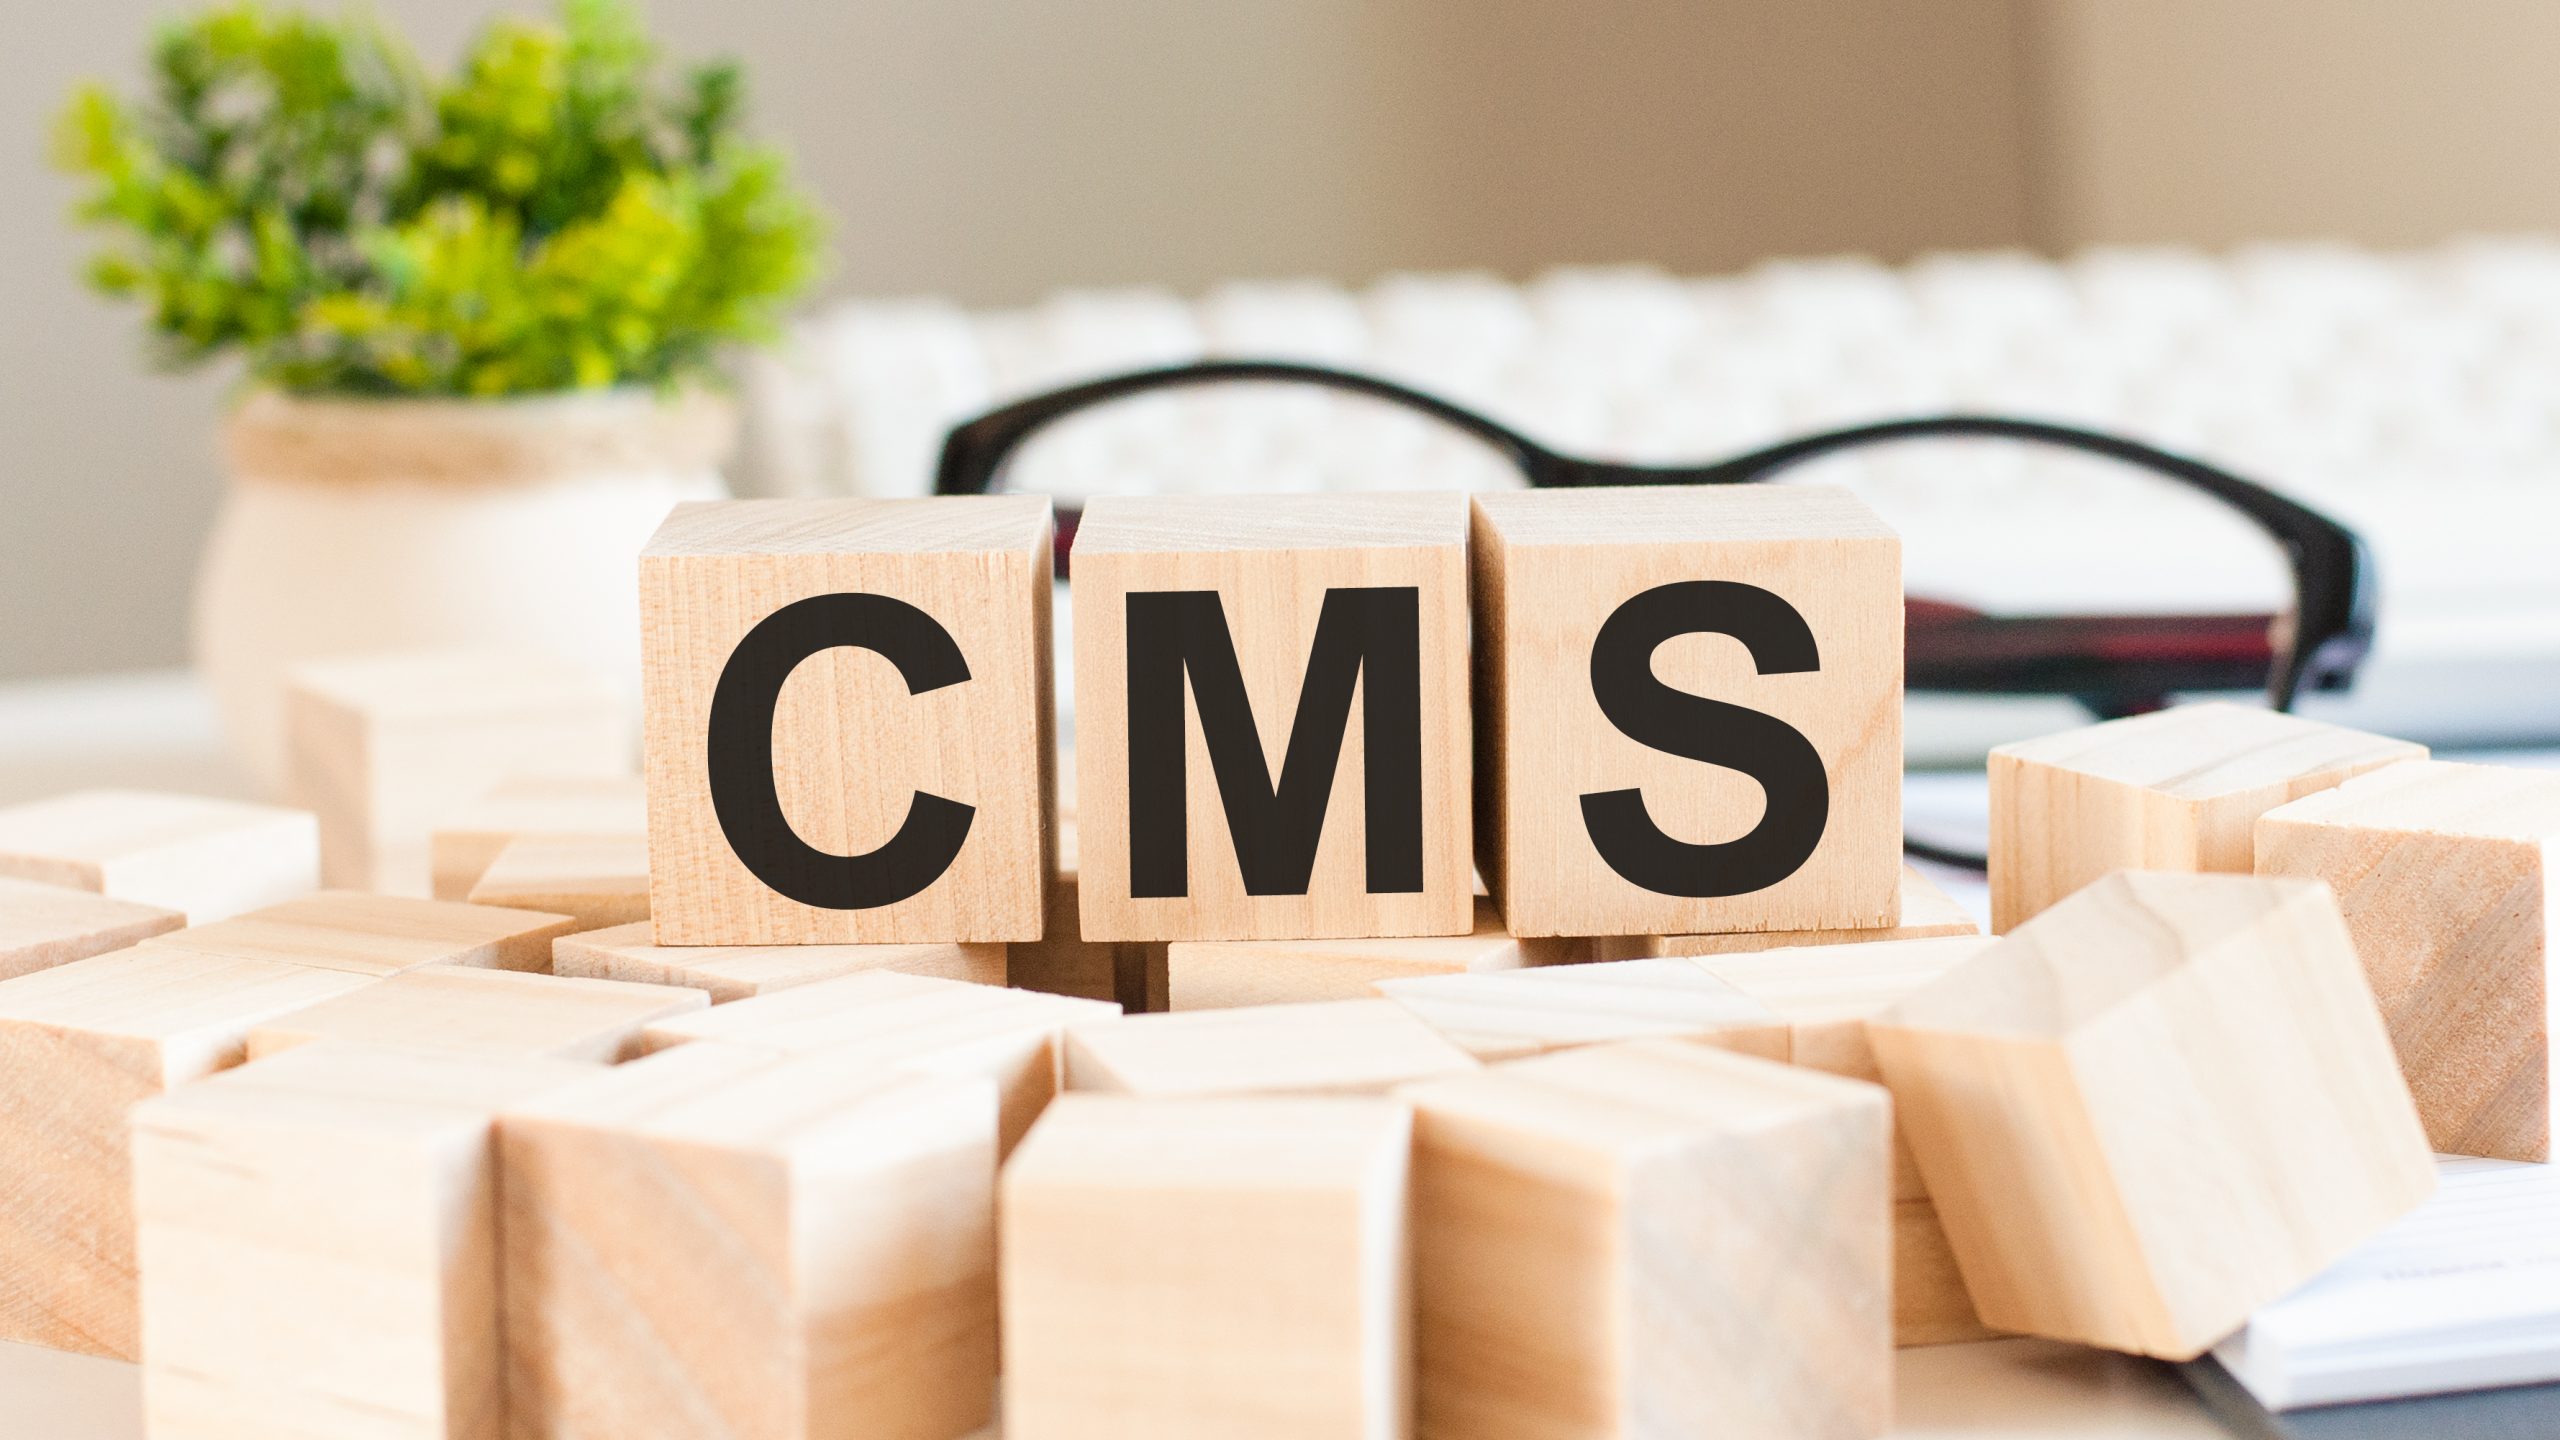 On CMS’ Recent Section 111 Alerts